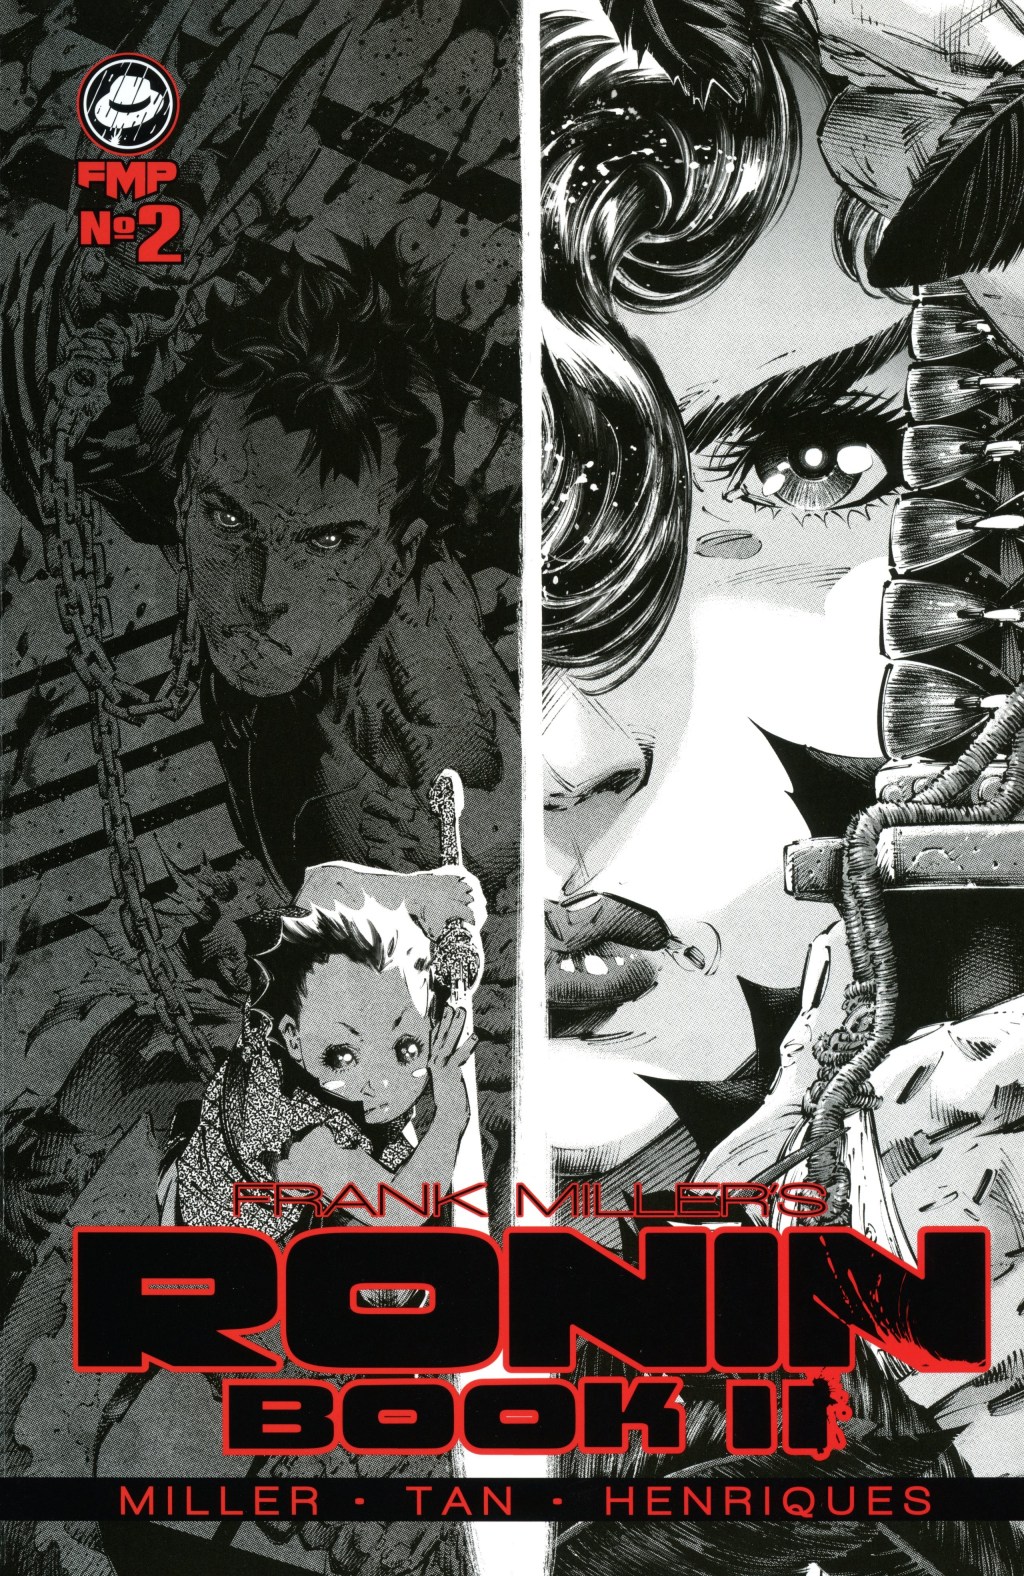 Ronin Book: II Issue #2 (2023), Frank Miller Presents. Words by Frank Miller. Art by Frank Miller, Phillip Tan, and Daniel Henriques